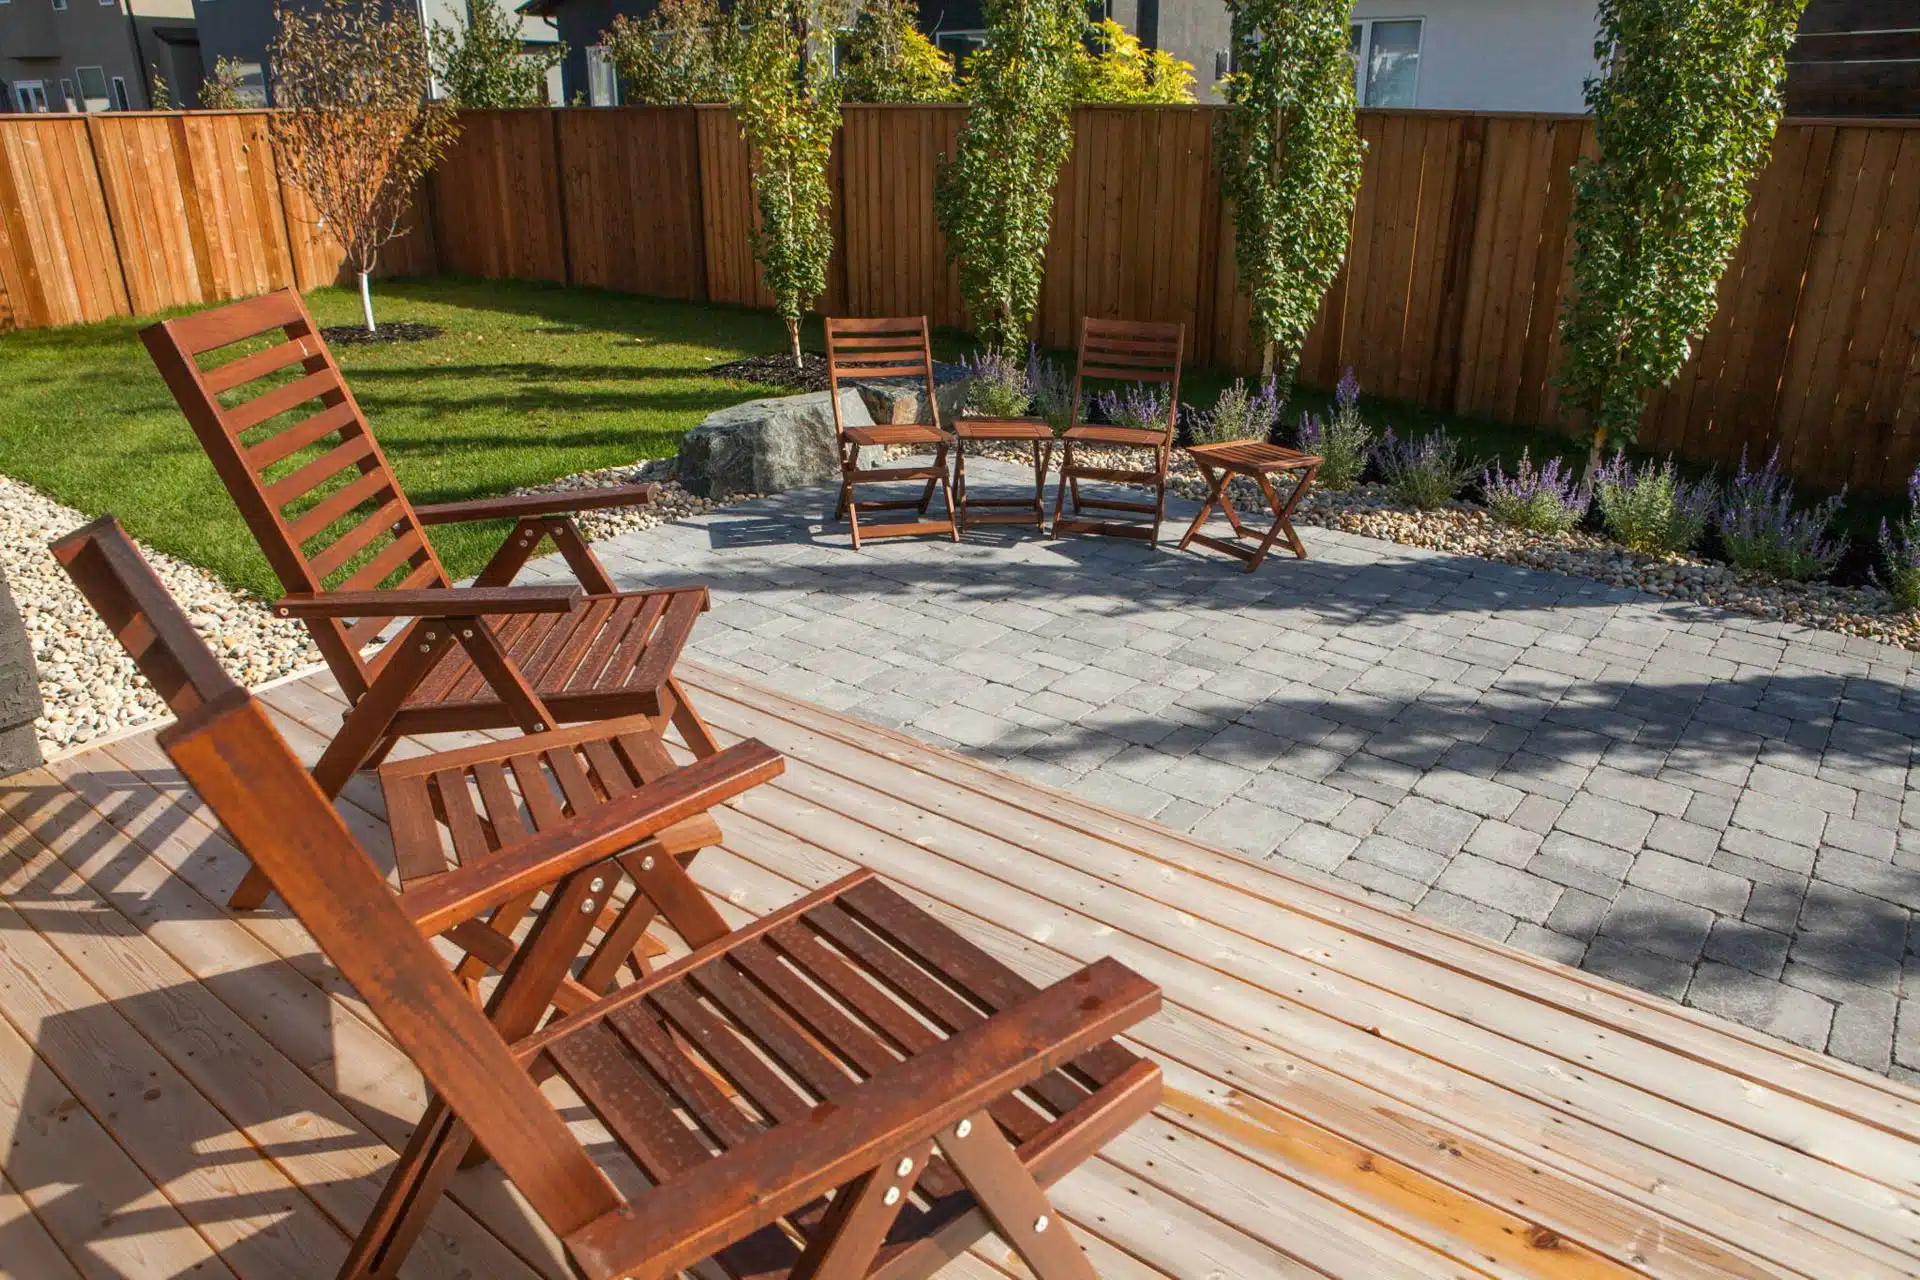 A backyard with a wooden deck, patio chairs, and a stone patio